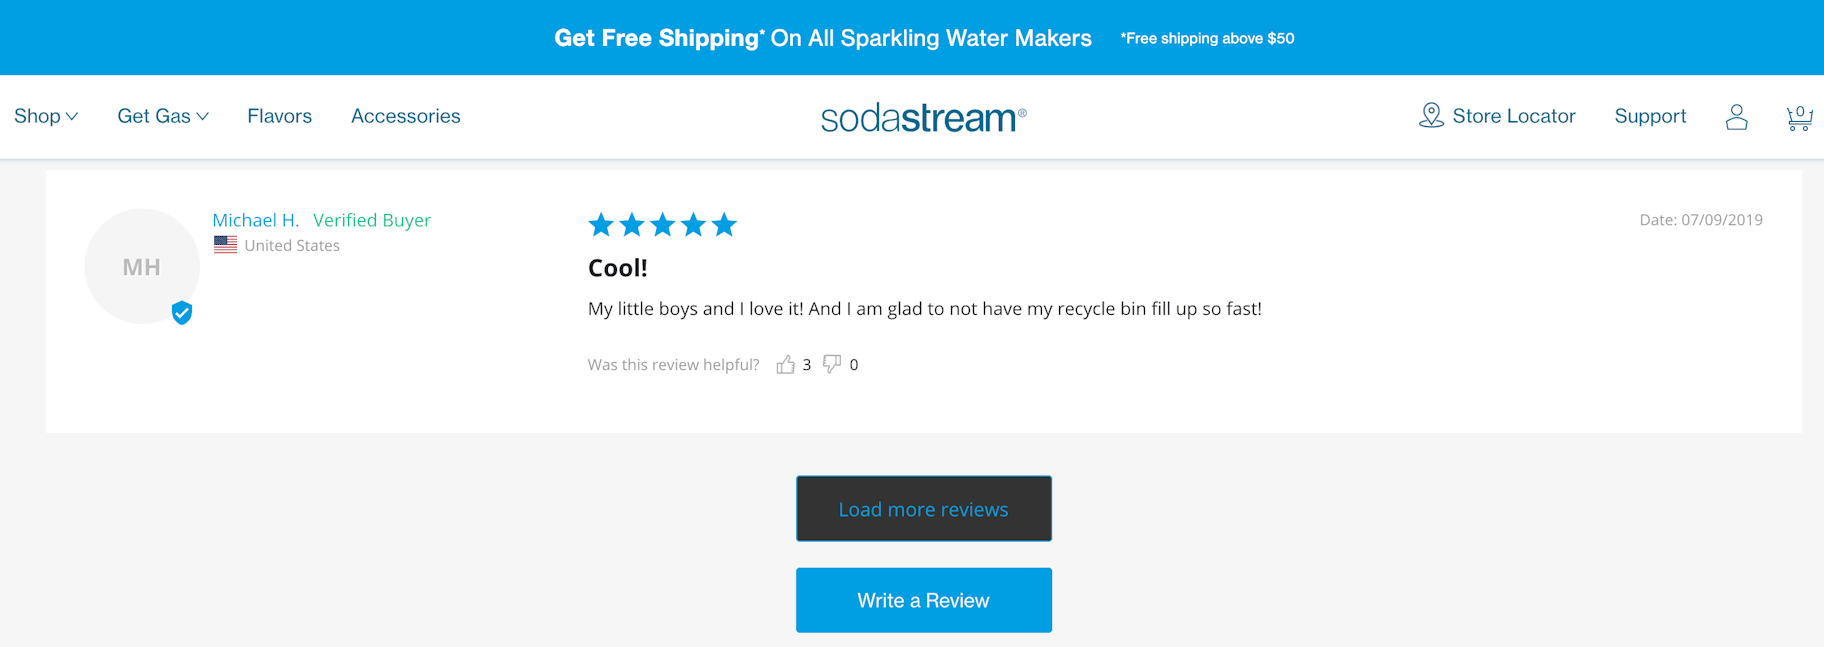 Reviews from the Soda Stream website